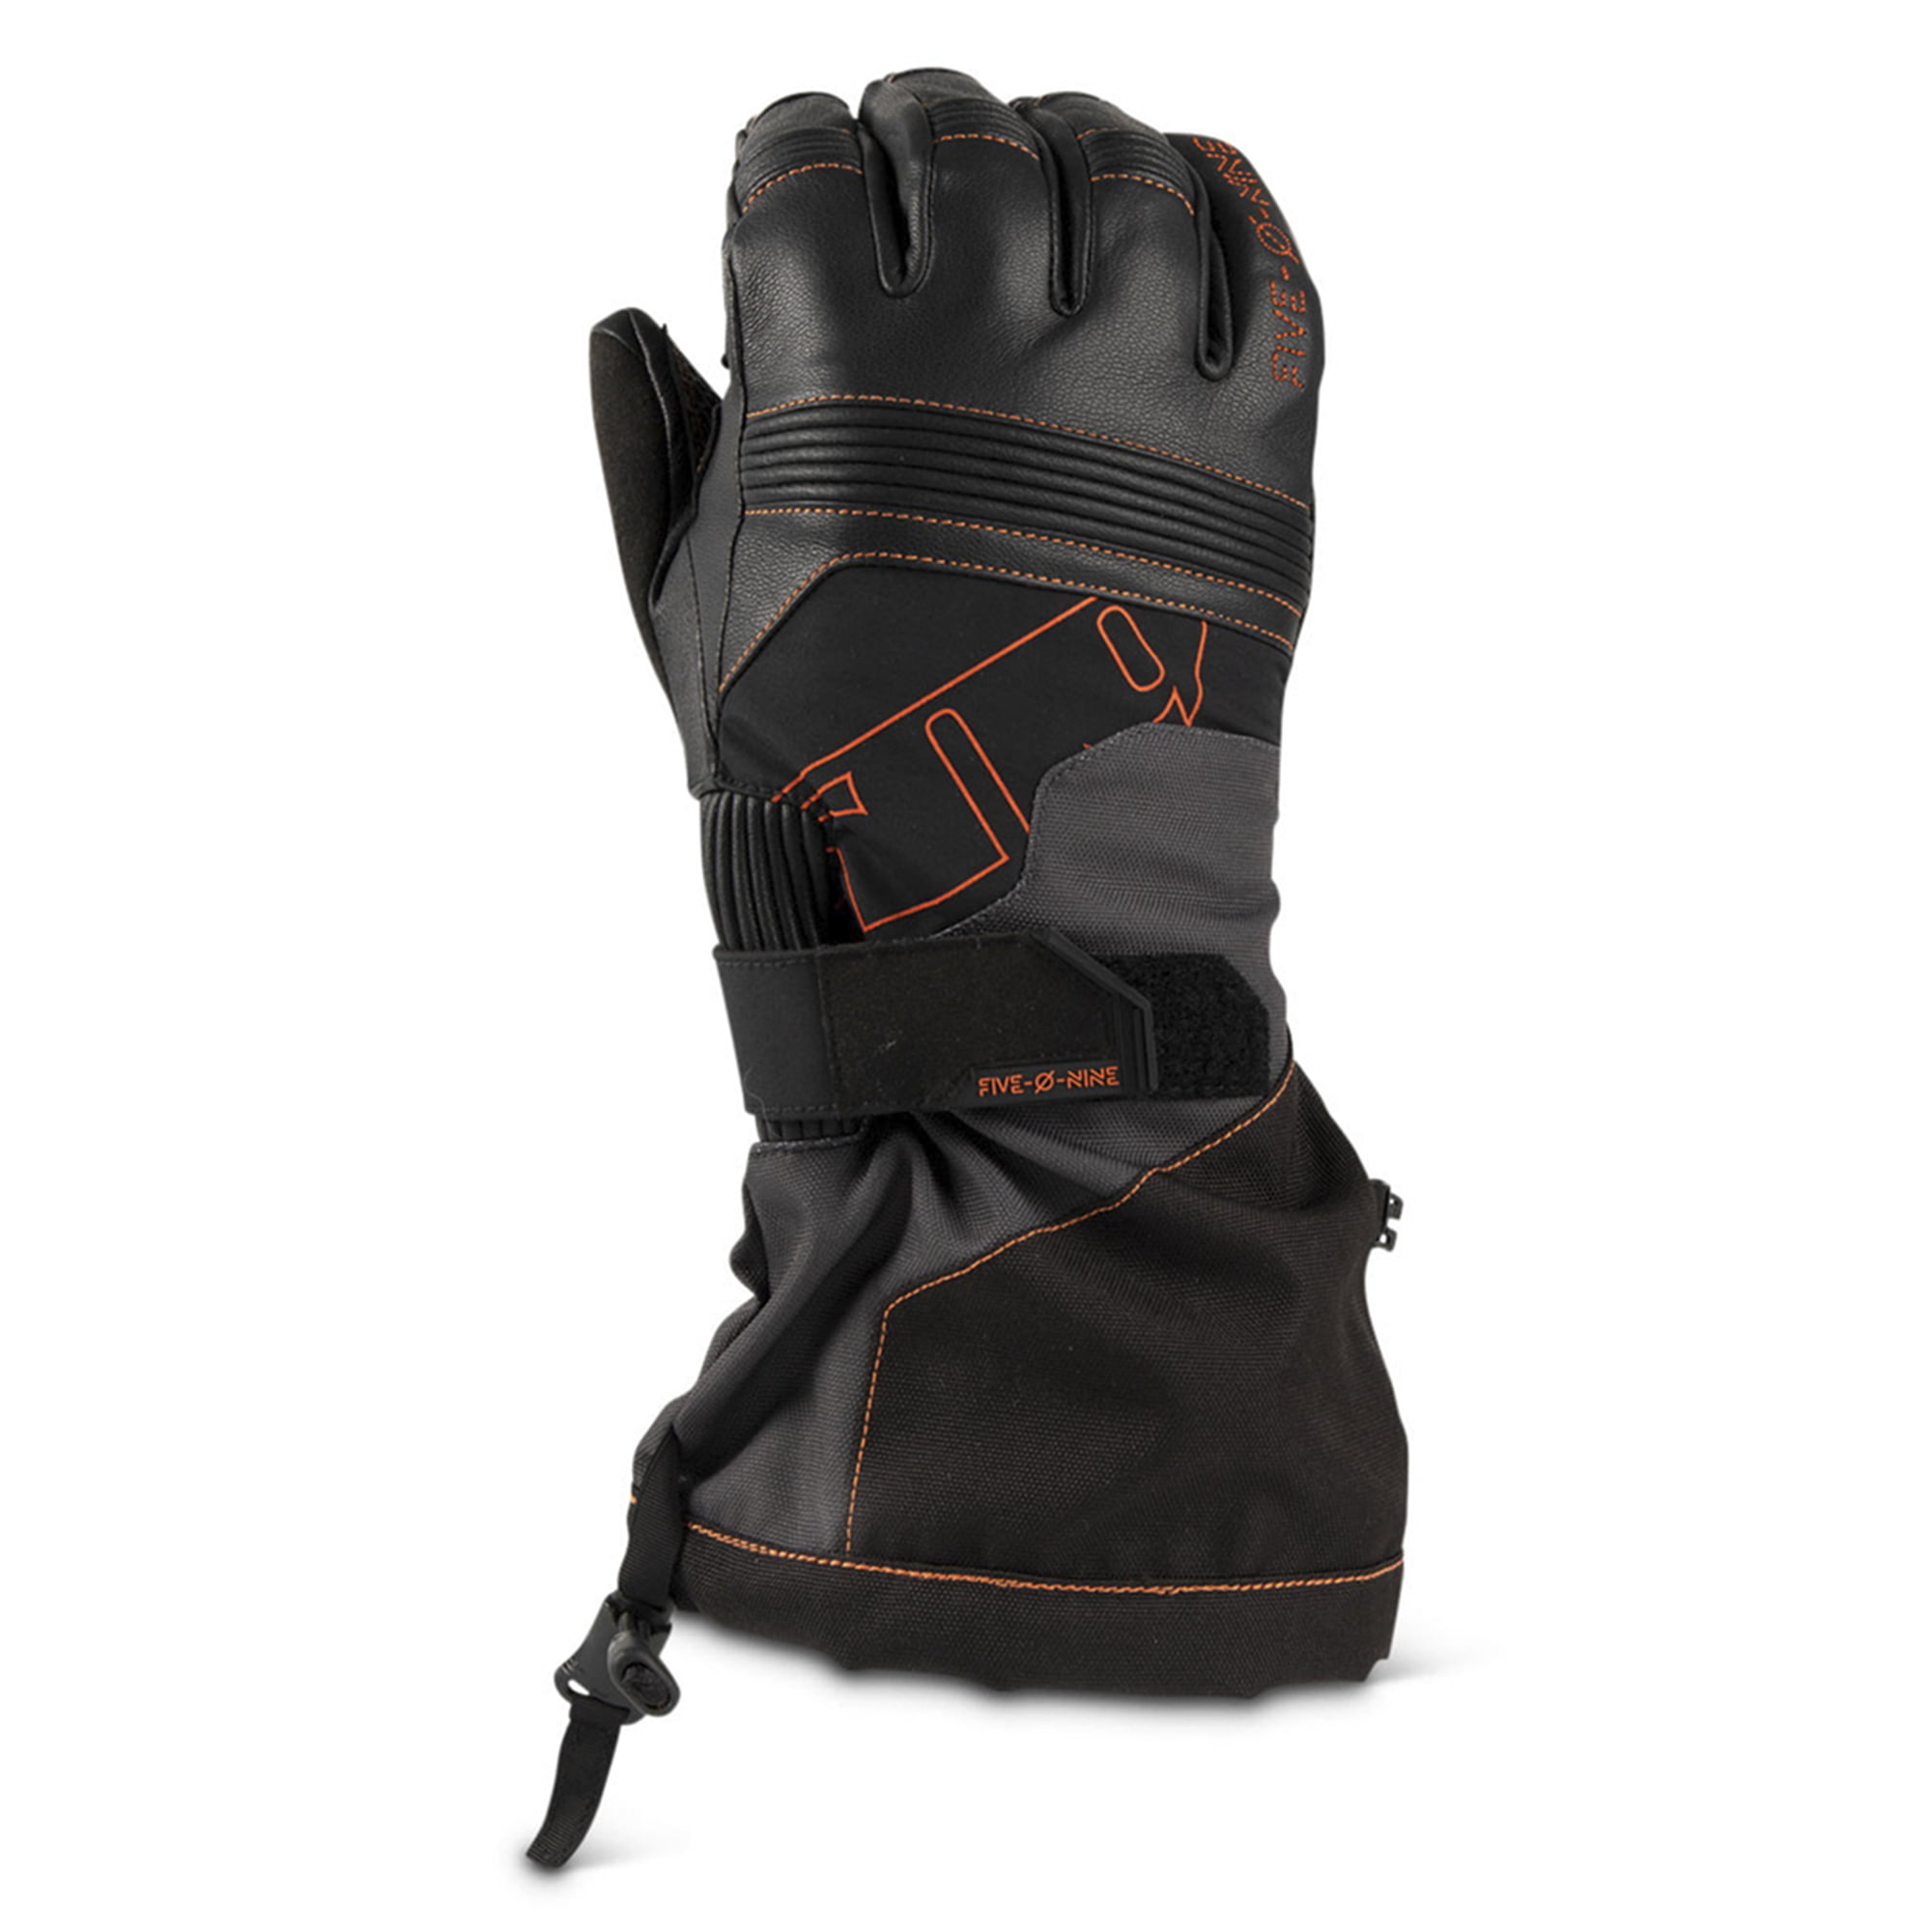 100gm 3M Thinsulate Large Waterproof Insulated Cowhide Winter Work Glove 